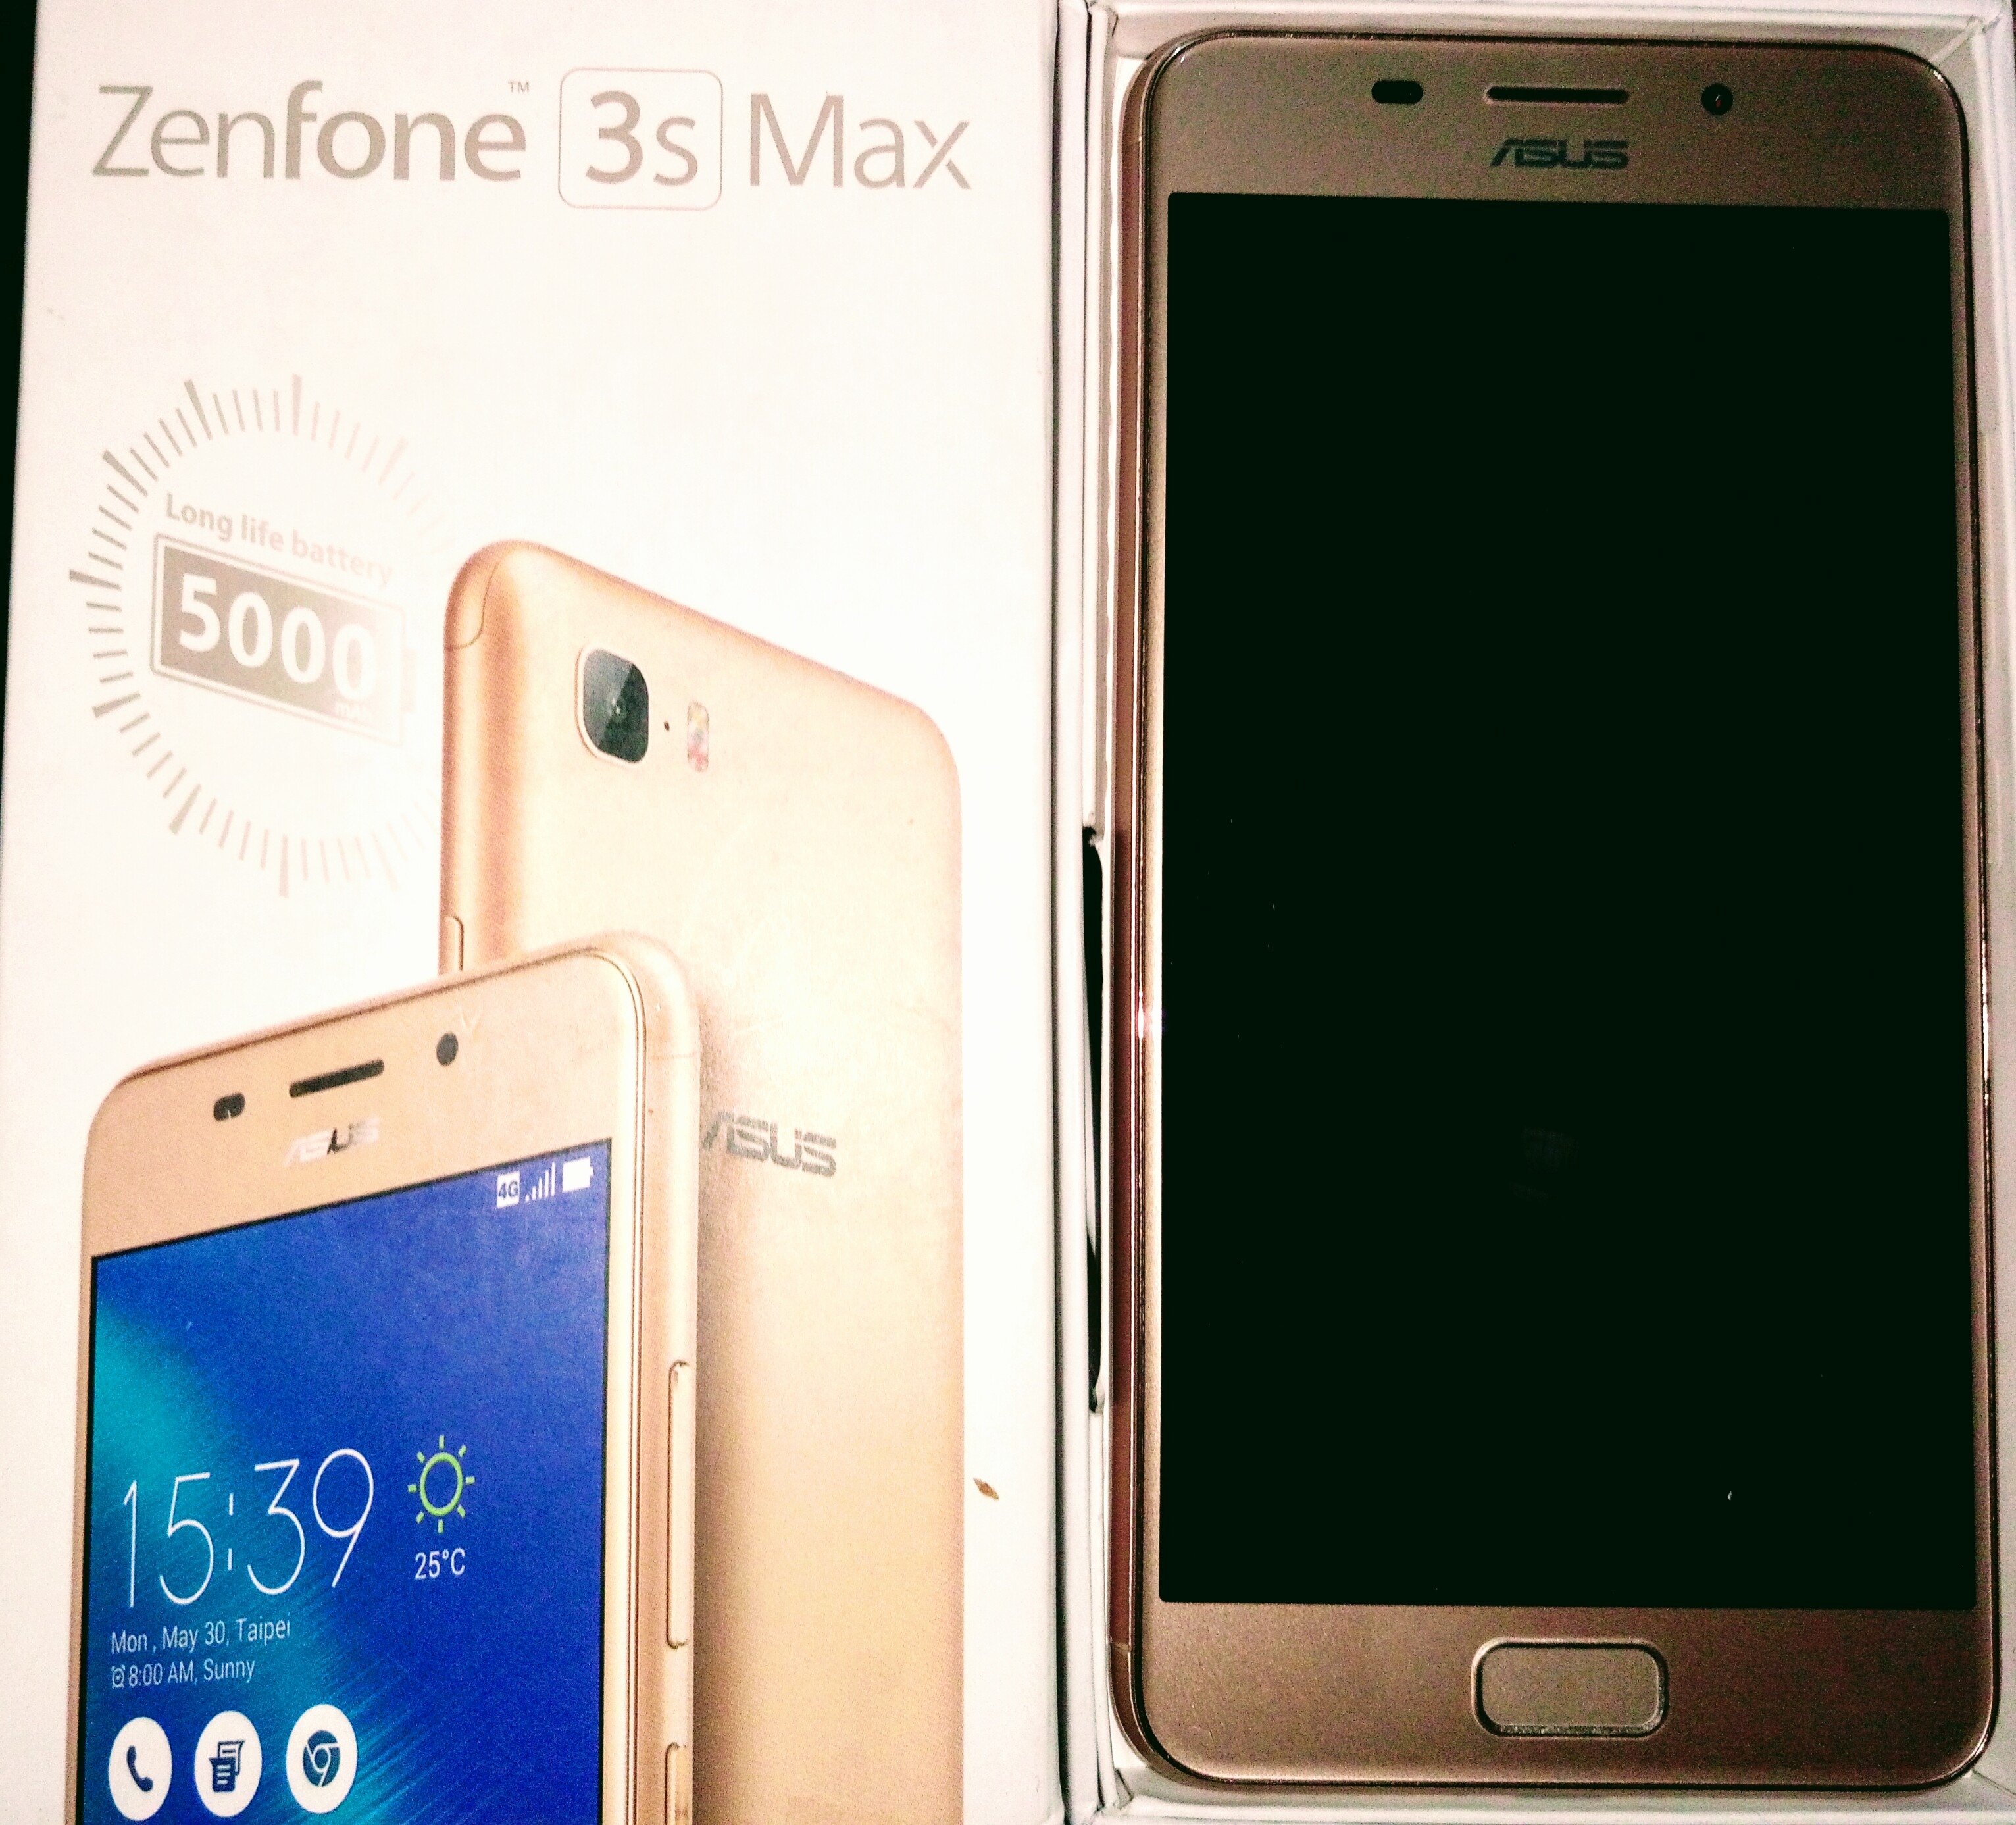 You are currently viewing Asus Zenfone 3s Max review –Powerpacked smartphone for unlimited entertainment